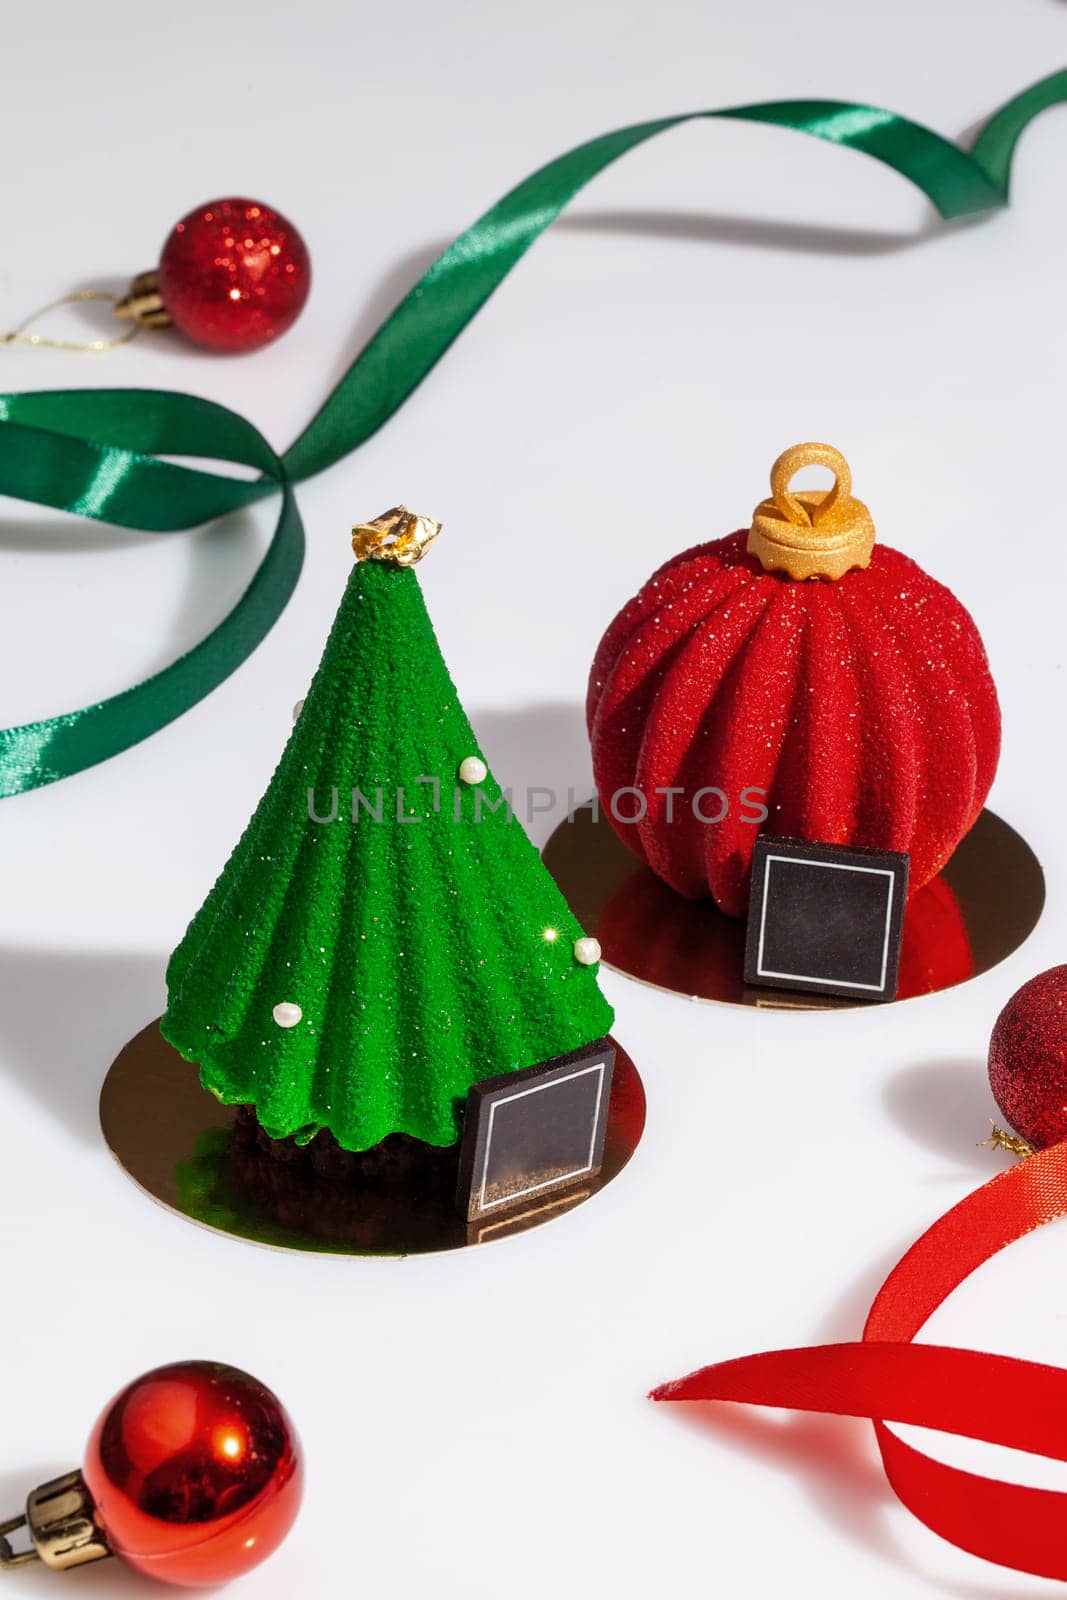 Holiday desserts in shape of Christmas tree and red ball by nazarovsergey